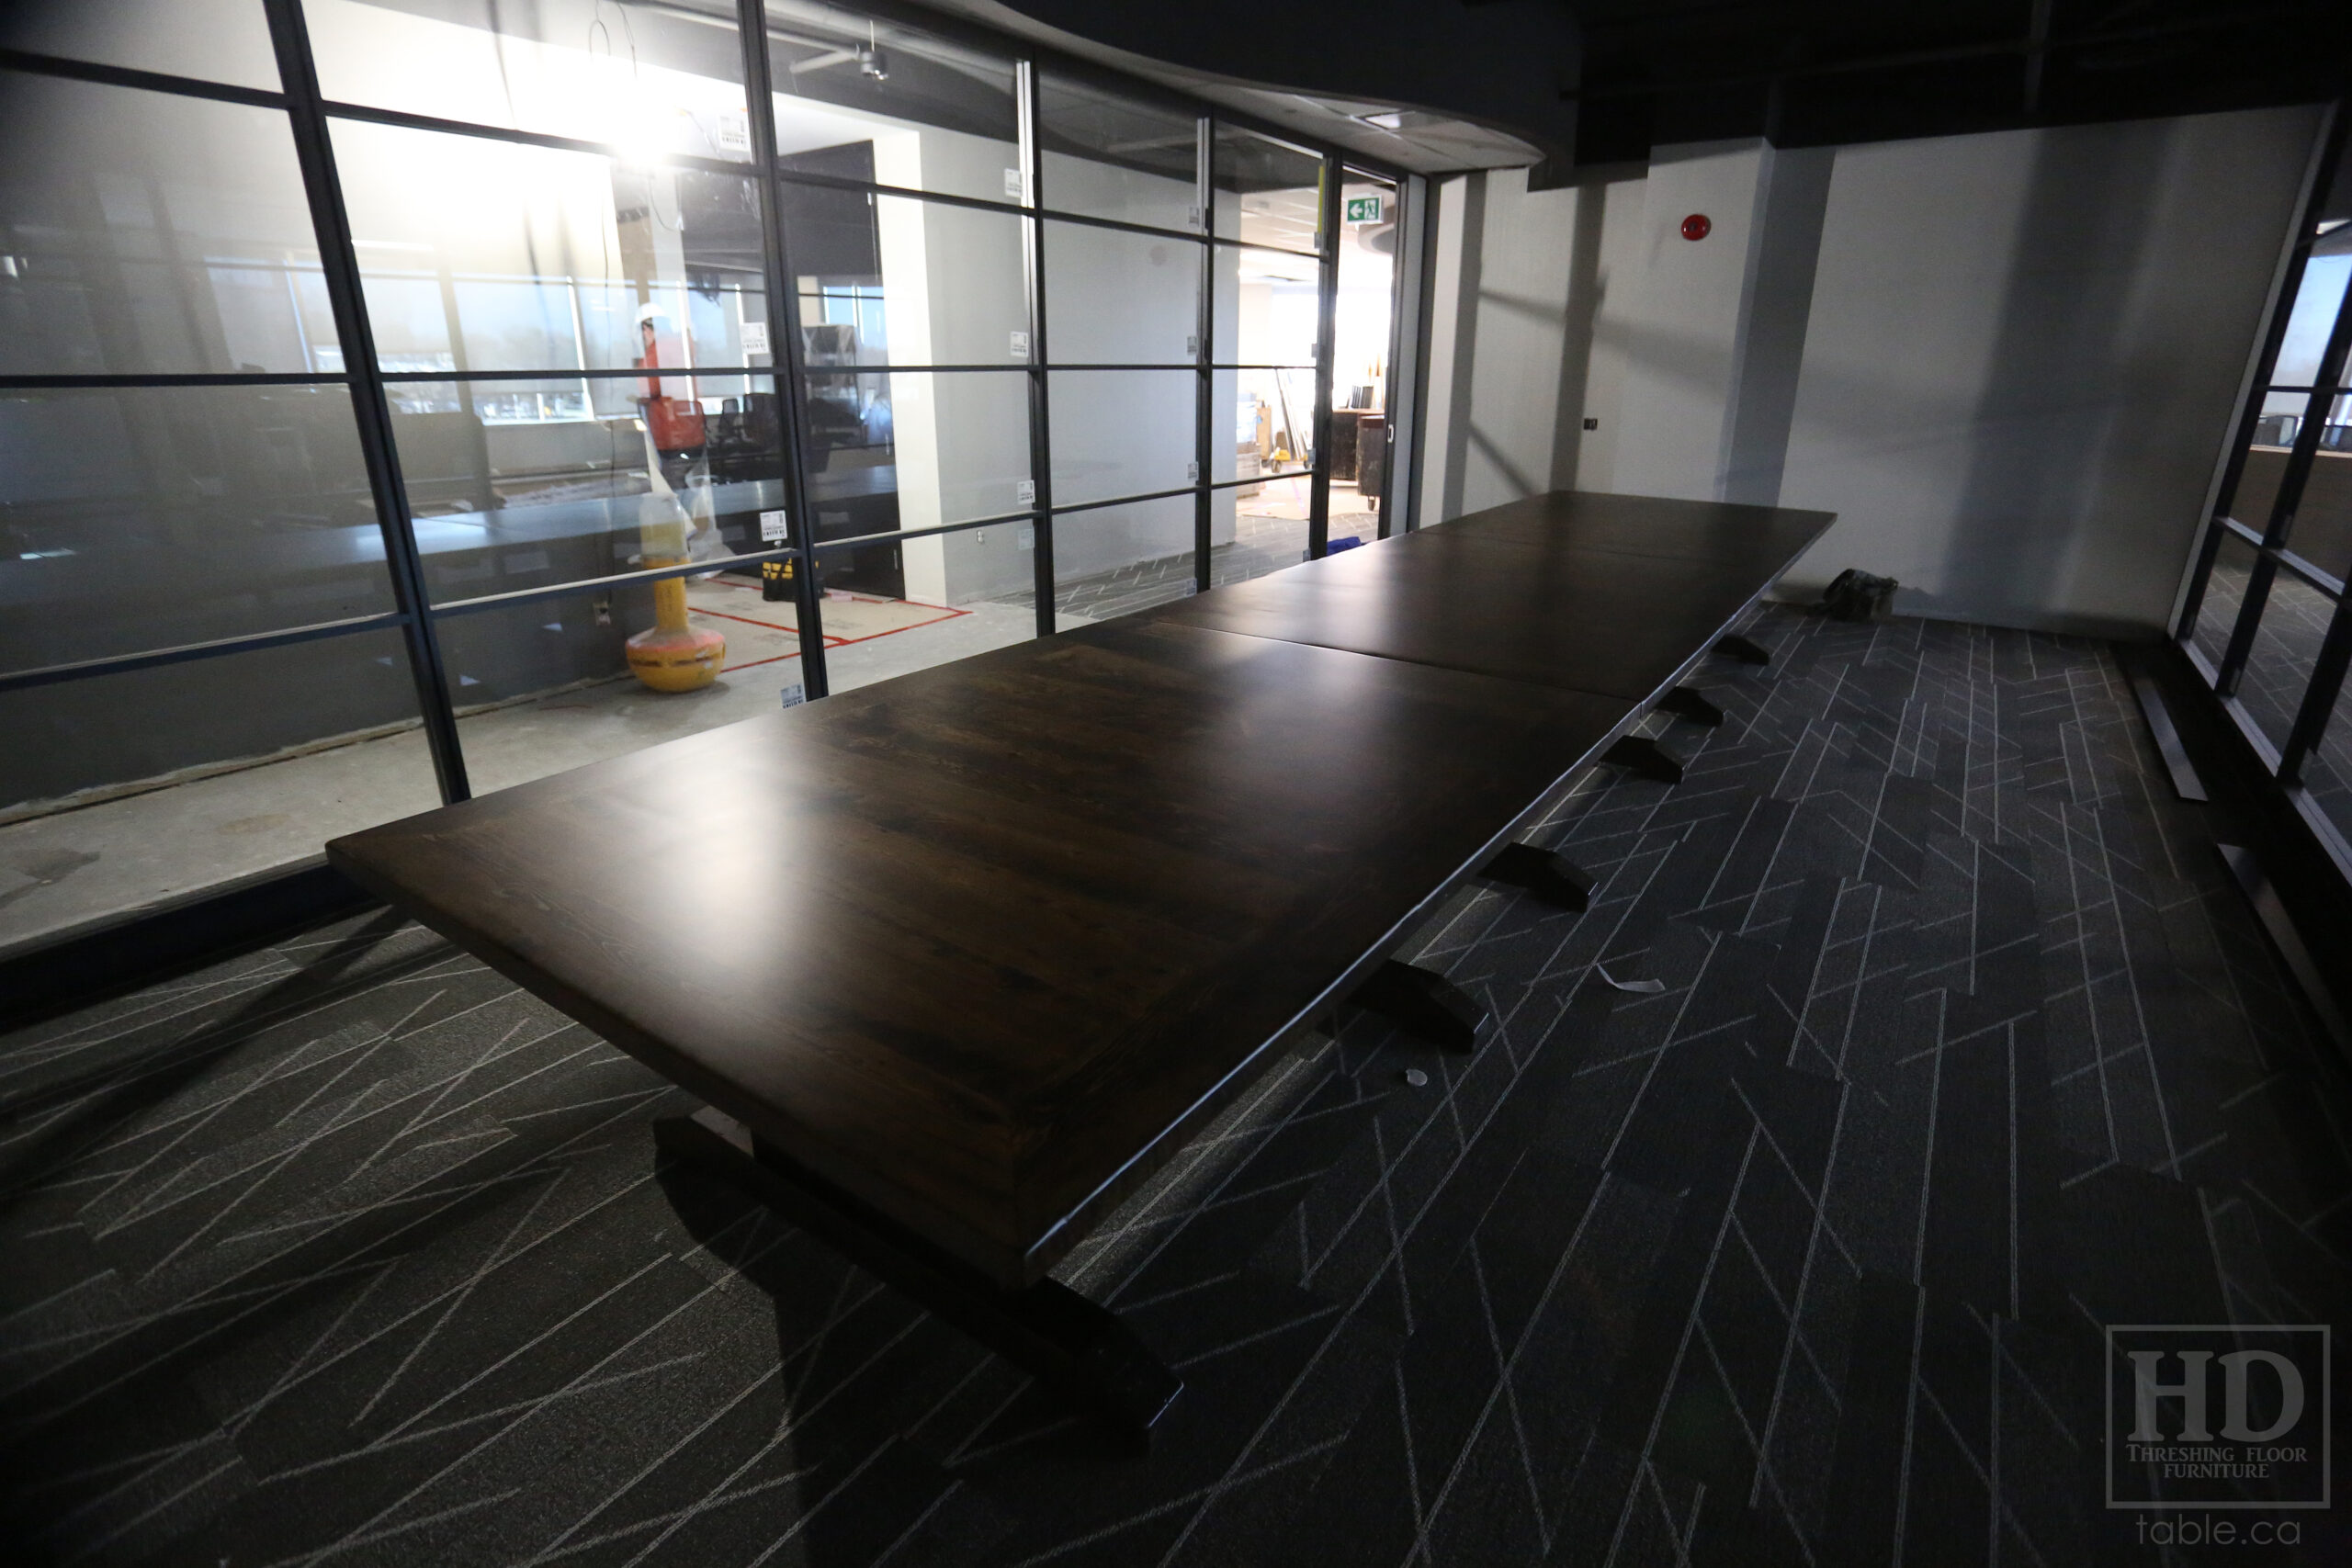 21' Ontario Barnwood Boardroom Table we made for an Ottawa Company - 60" wide - Trestle Base - Old Growth Hemlock Threshing Floor Construction - Onsite final dowling 1/3 1/3 1/3 - 2 Posts Per 1/3 -Original edges & distressing maintained - Black Stain Option - Premium epoxy + matte polyurethane finish  - www.table.ca